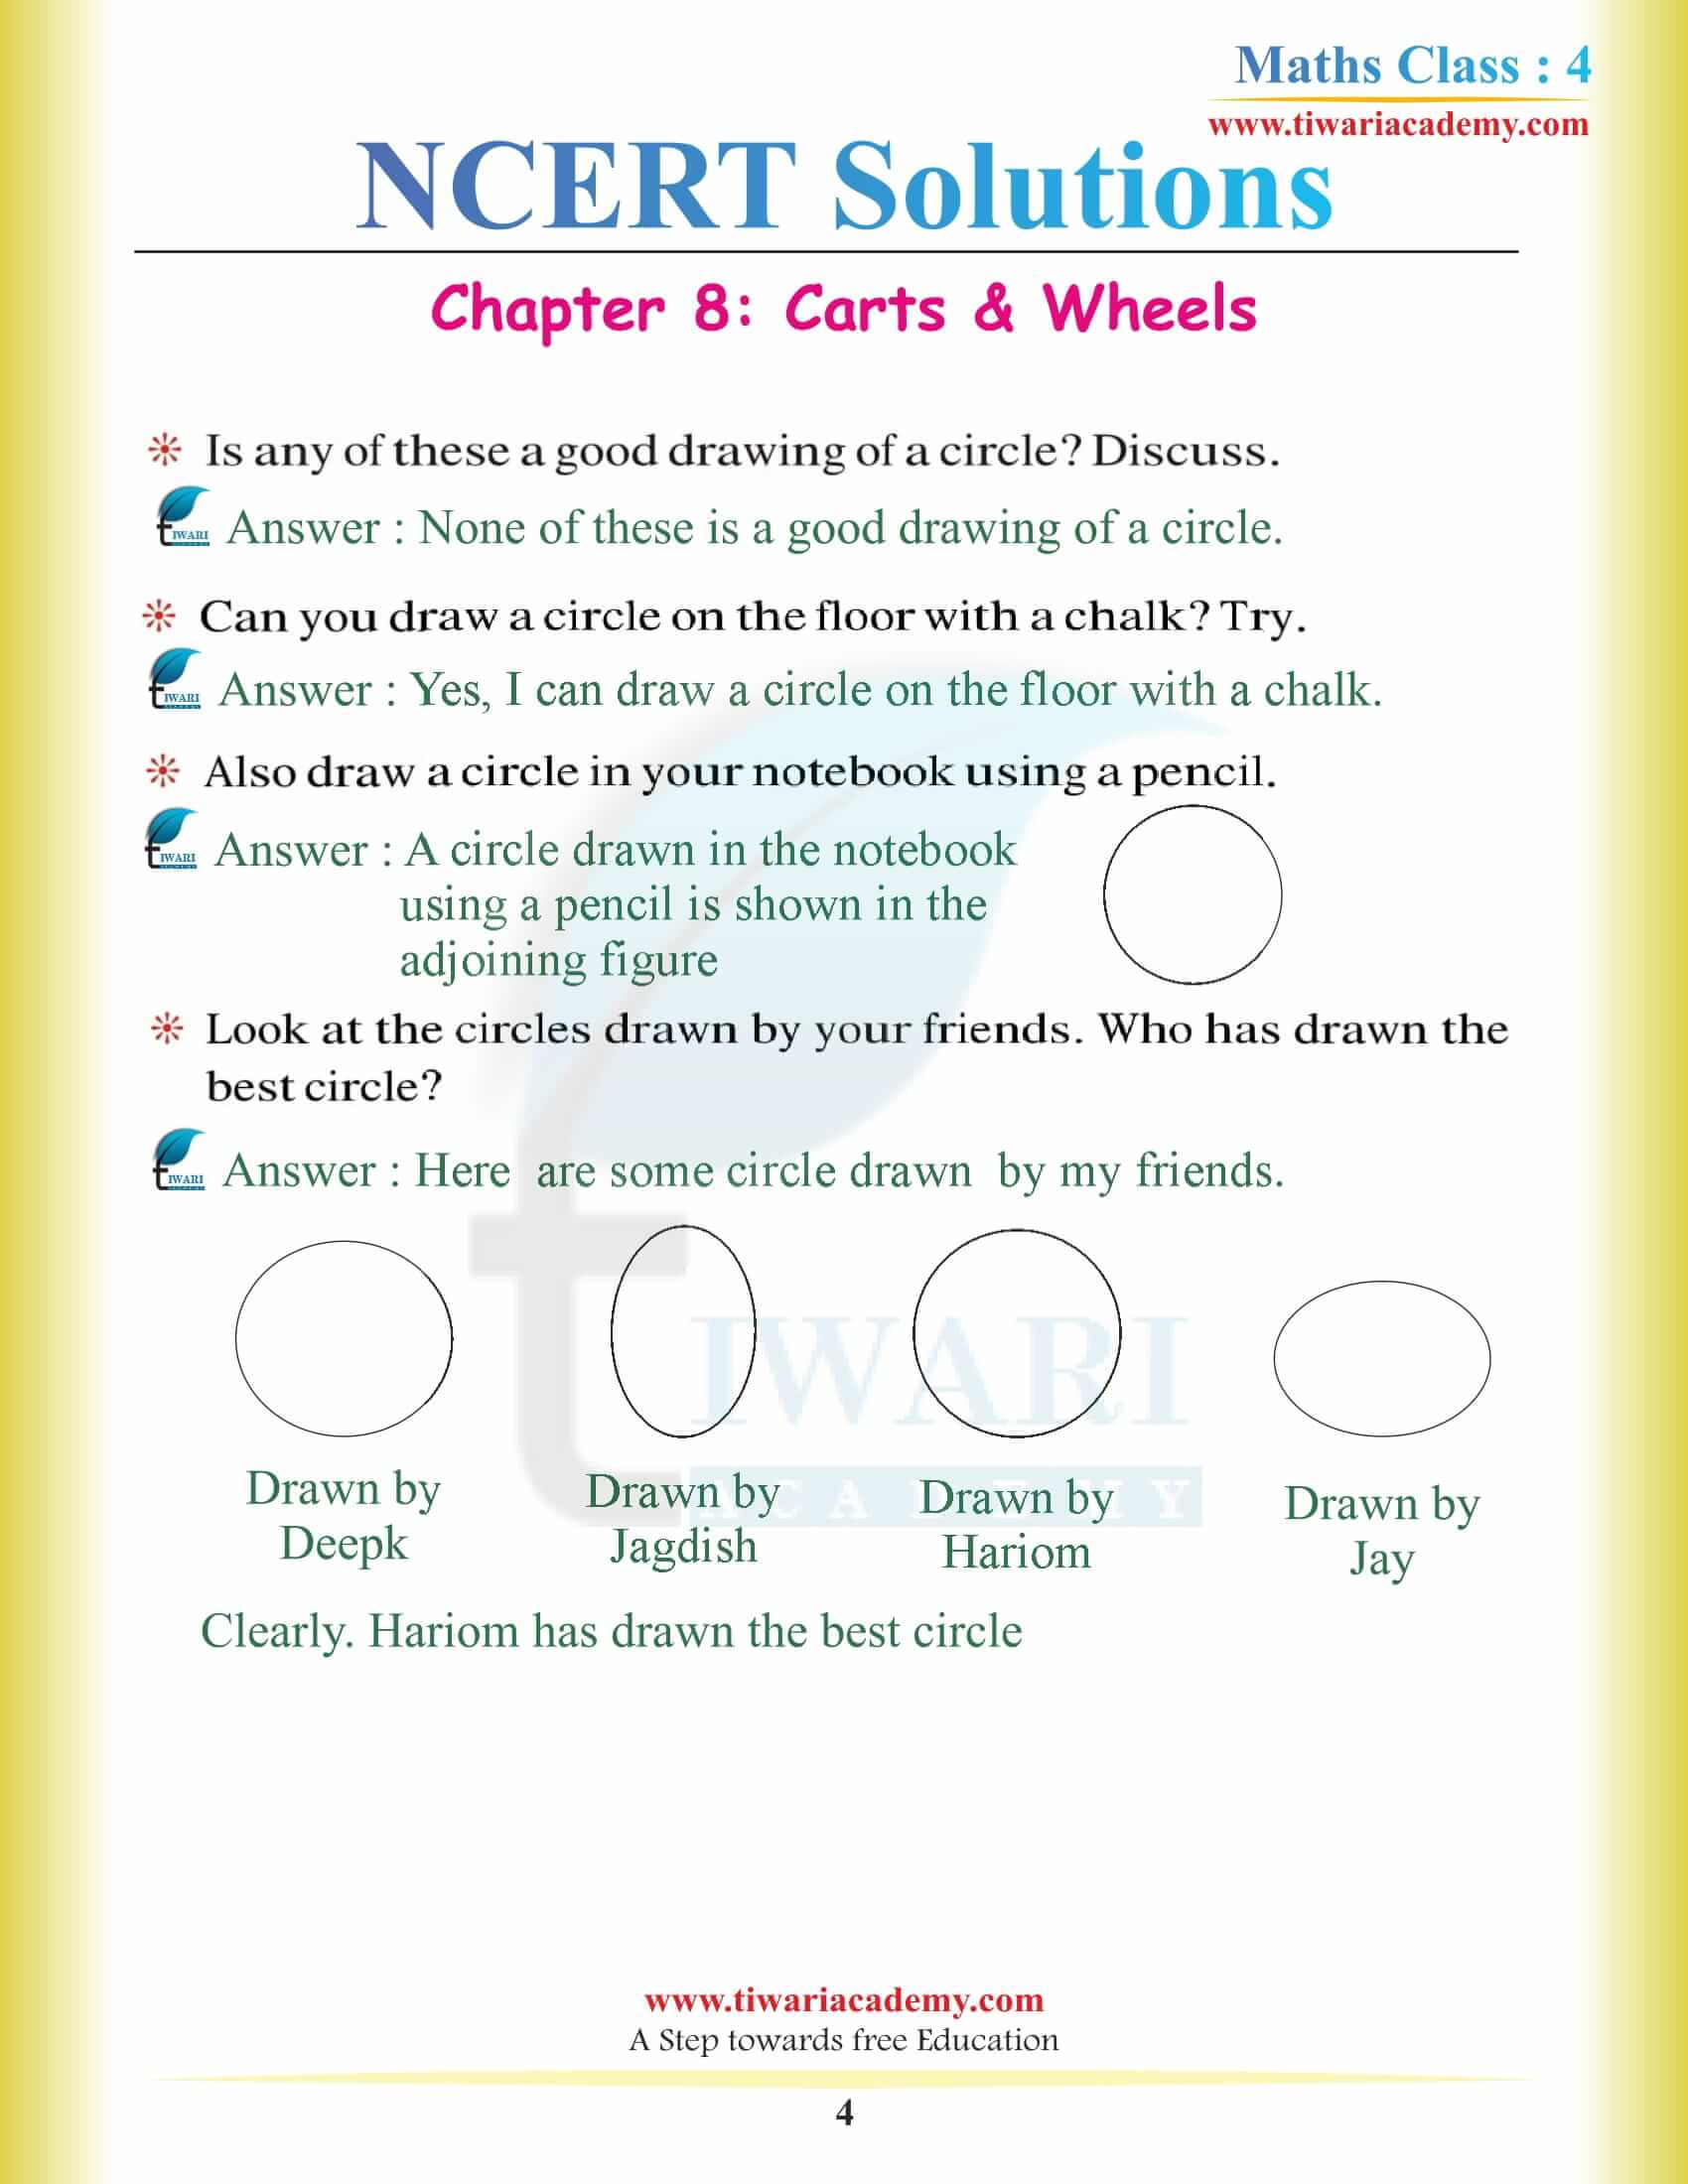 NCERT Solutions for Class 4 Maths Chapter 8 in English Medium